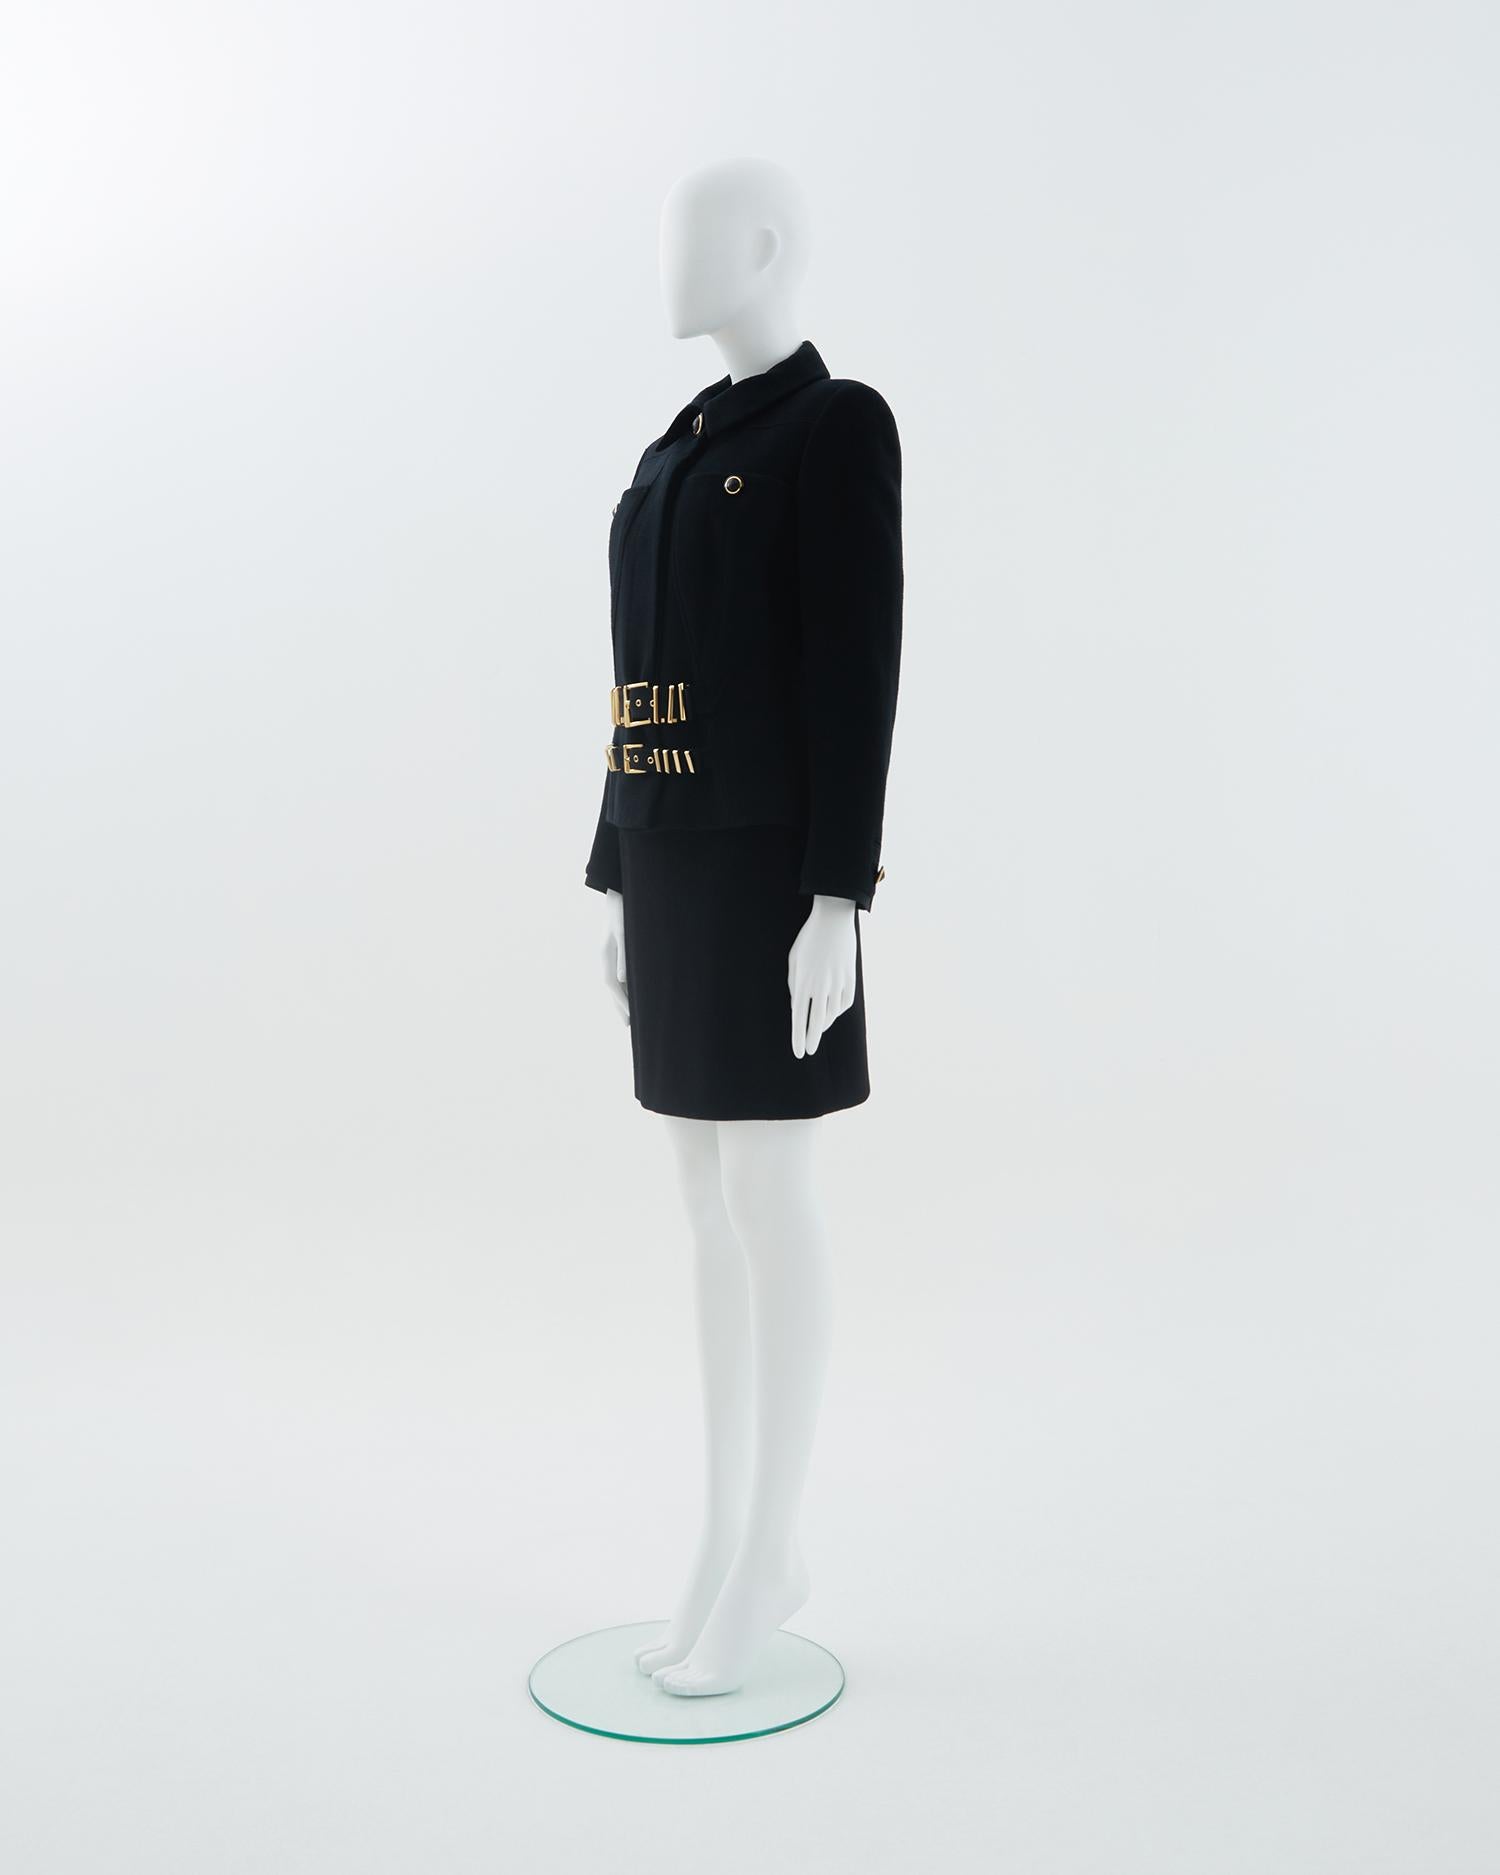 - ‘Miss S&M’ collection
- Sold by Skof.Archive
- Wool accented bondage buckle Gianni Versace cropped jacket and skirt set
- Designed by Gianni Versace
- Two topstitched belts with gold-tone metal loops in front and one on the back 
- Two pockets in